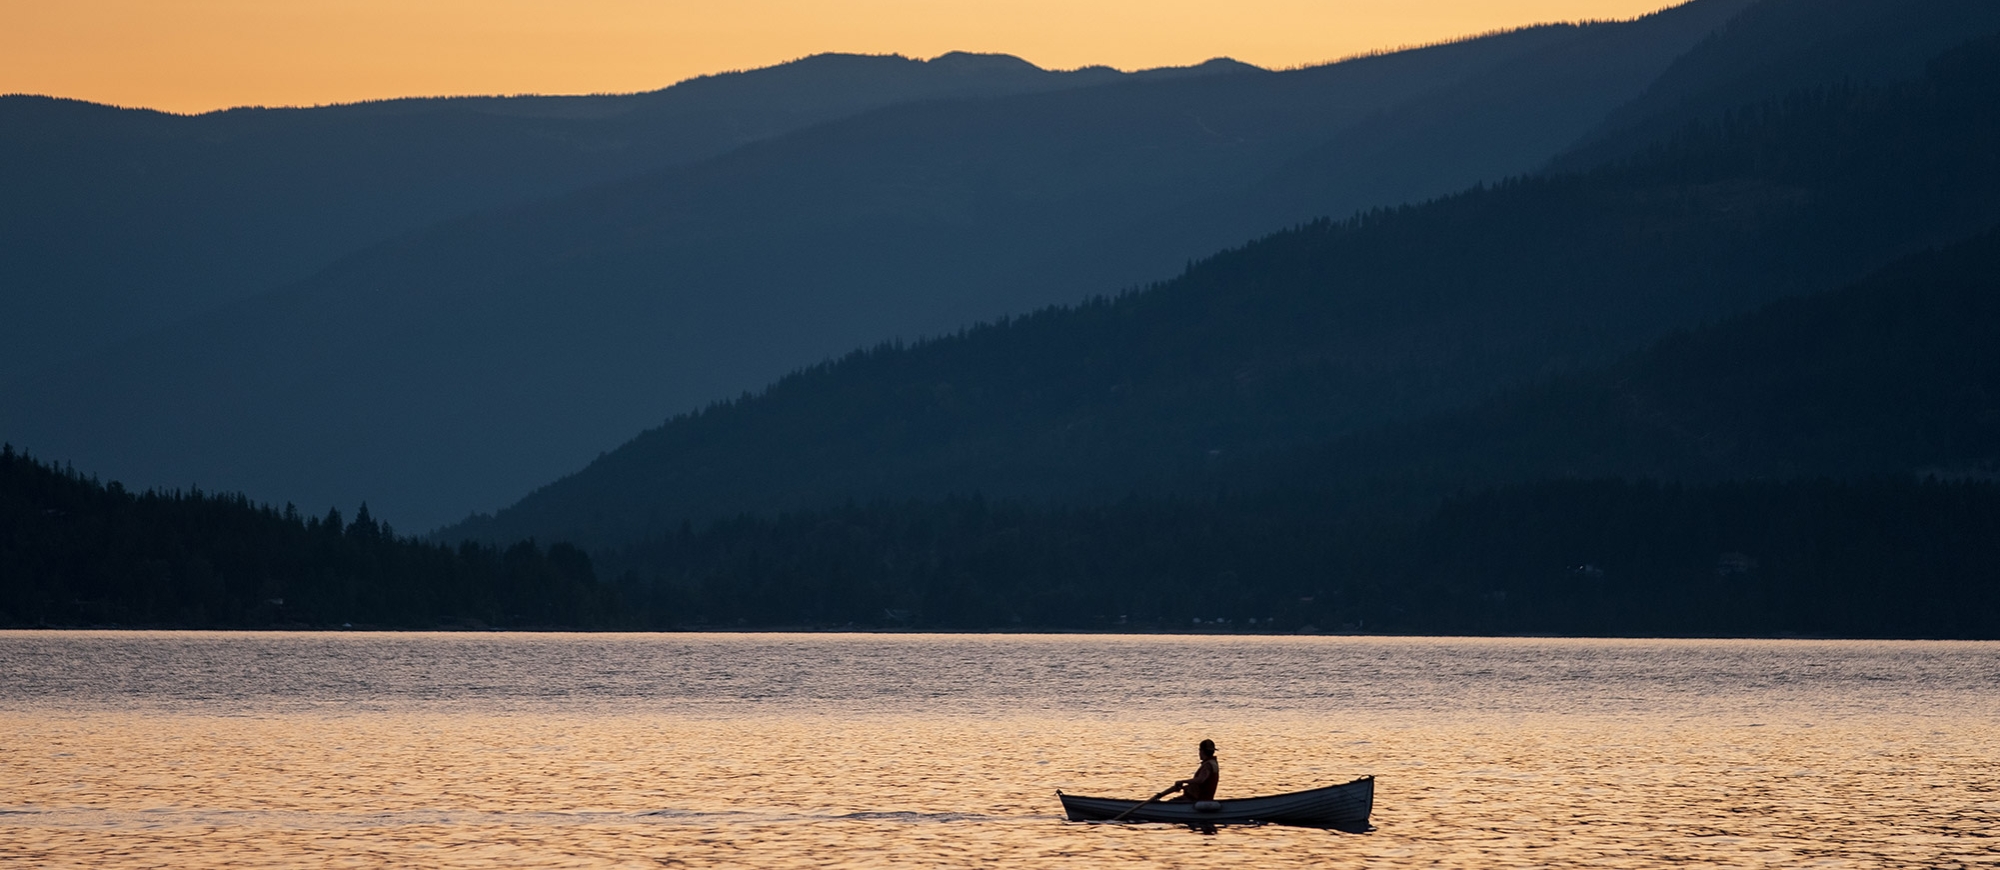 A person in a row boat silhouetted by the sunset on Kootenay Lake